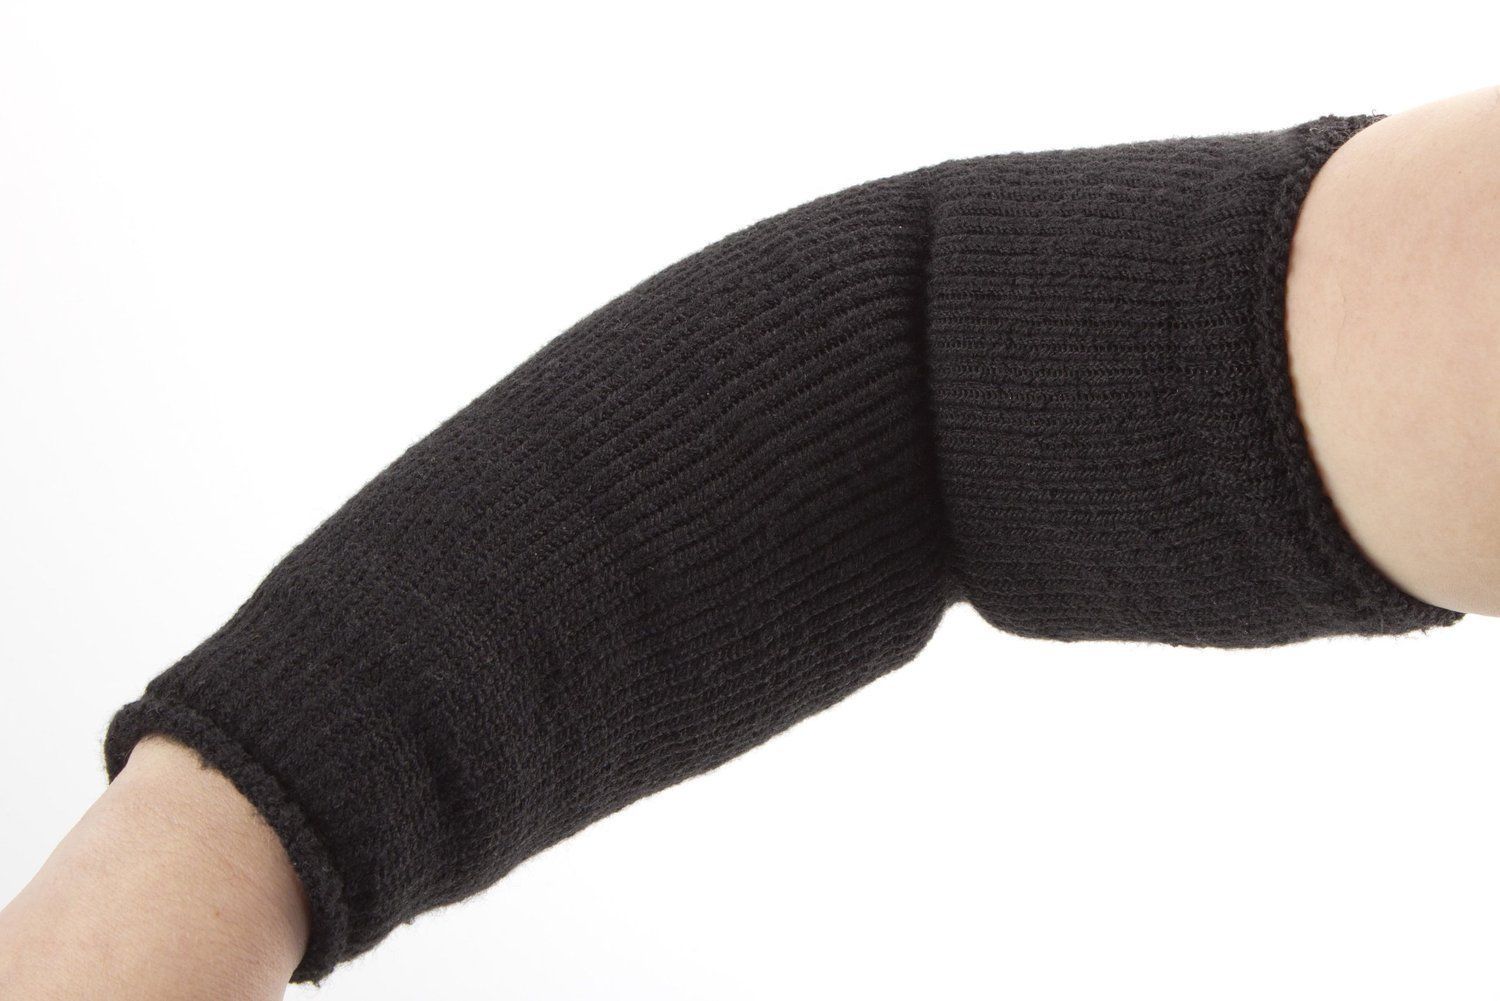 Heat Holders - Mens Womens Black Thermal Arm / Leg Sleeve Joint Warmers, 2 Sizes